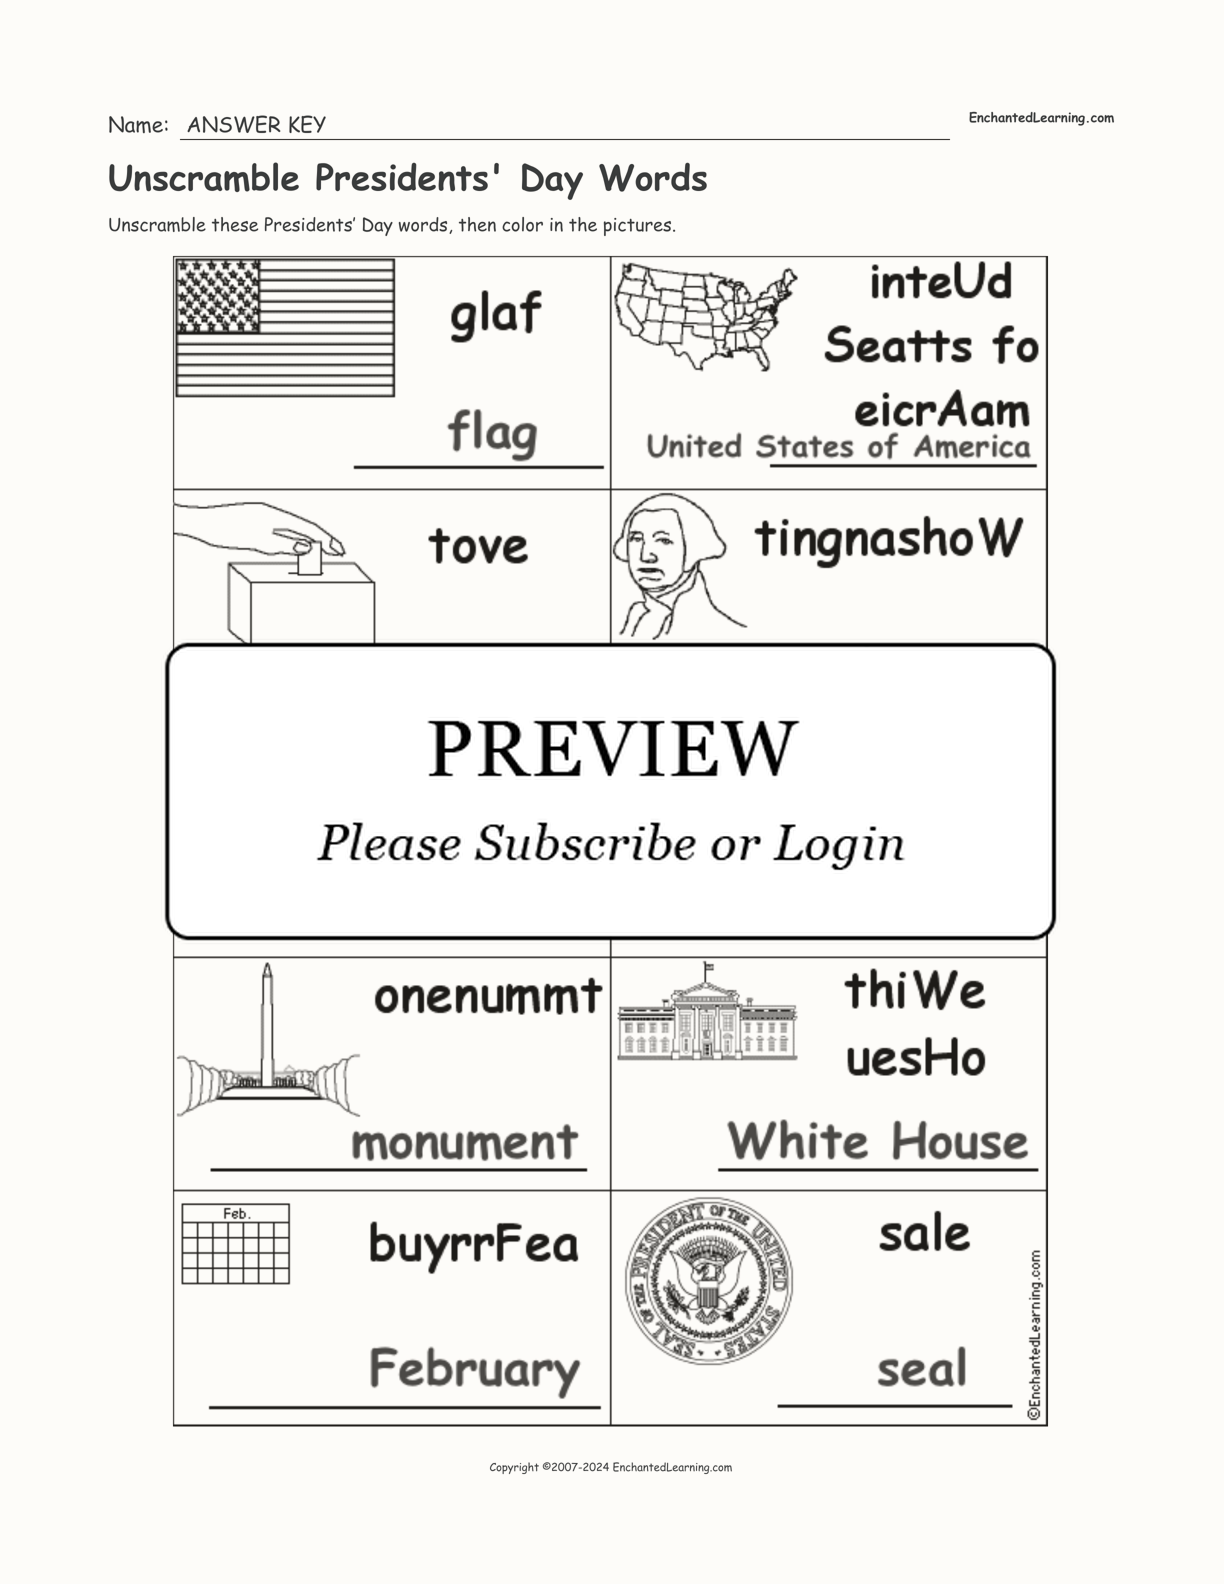 Unscramble Presidents' Day Words interactive worksheet page 2